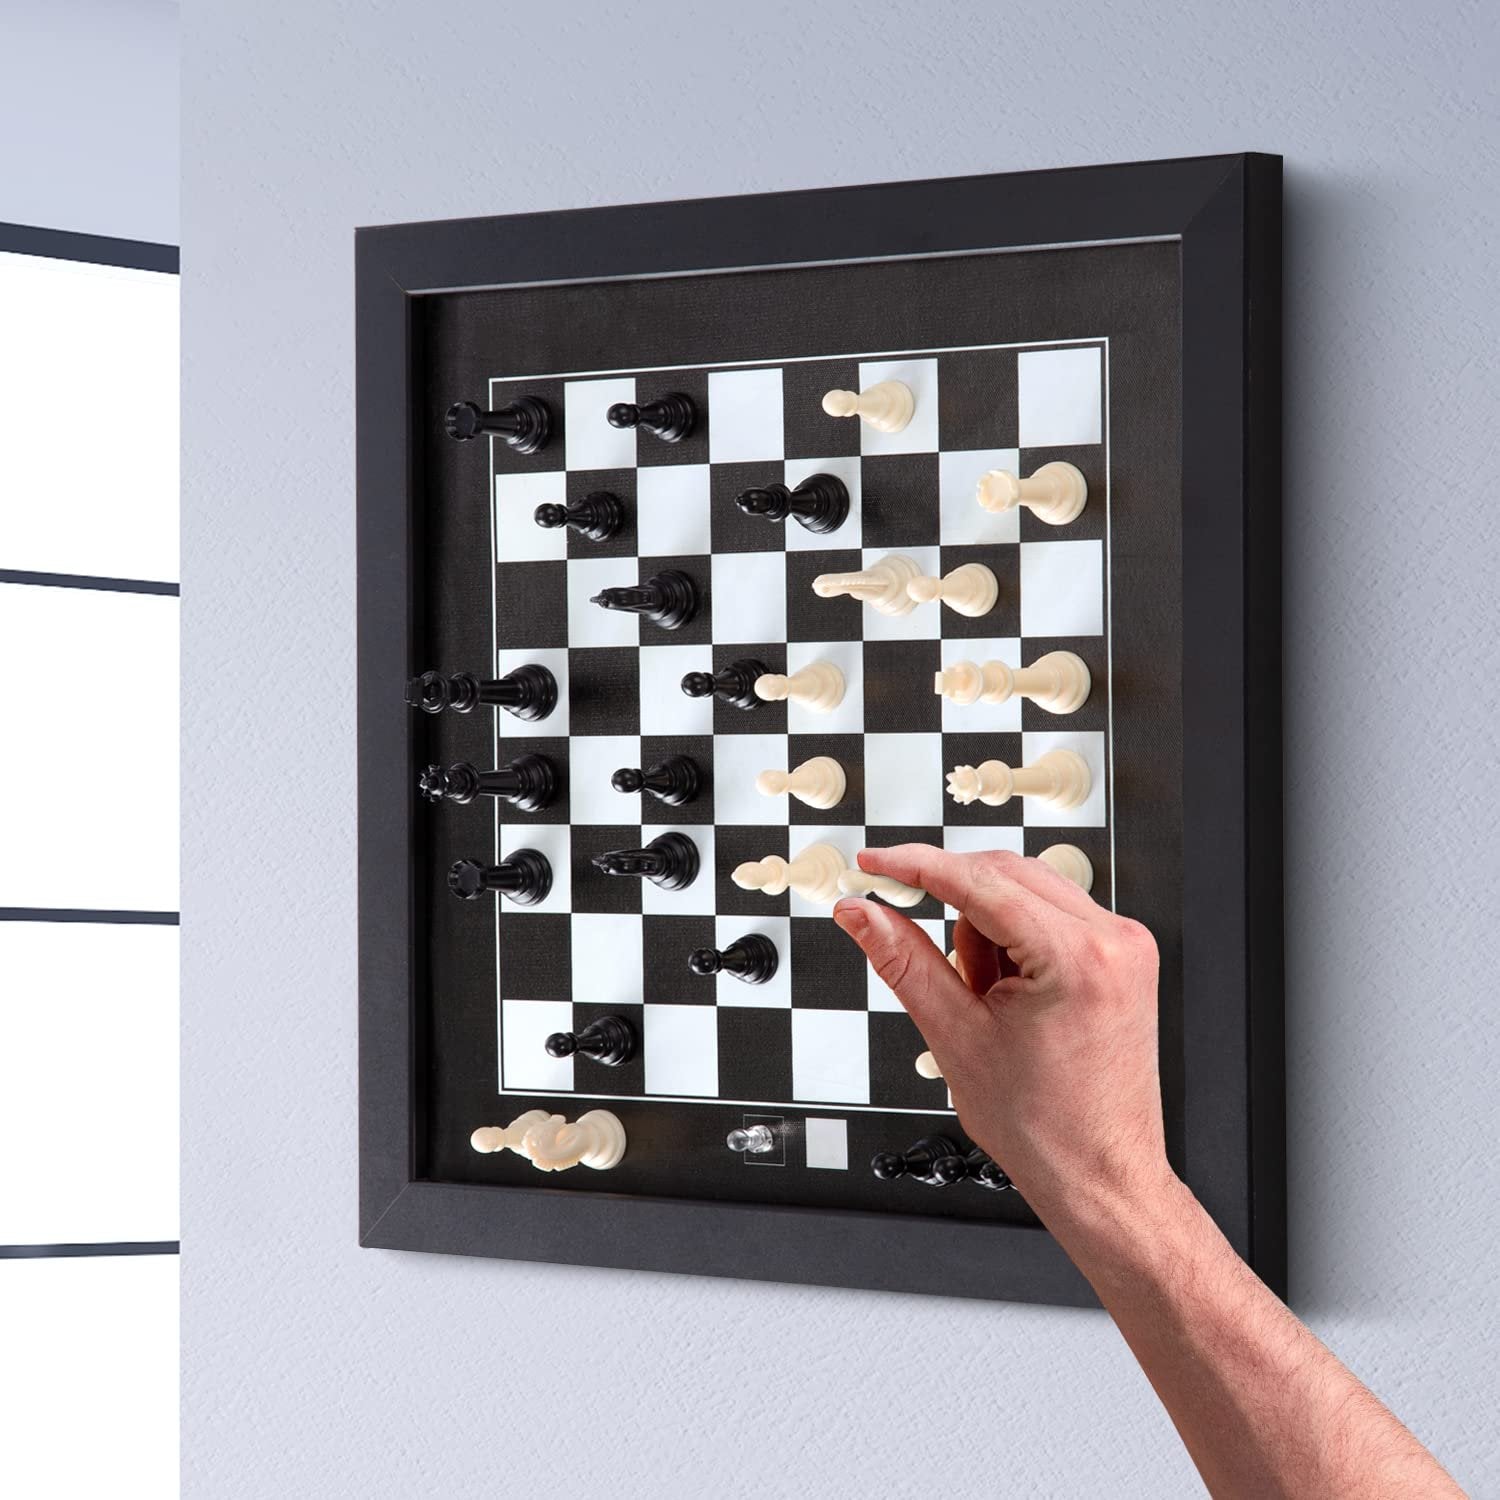 Bundaloo Hanging Magnetic Wall Chess Set - Wooden Board with Black & White Game Pieces - Chessboard Playing Art & Decor for Home and Office